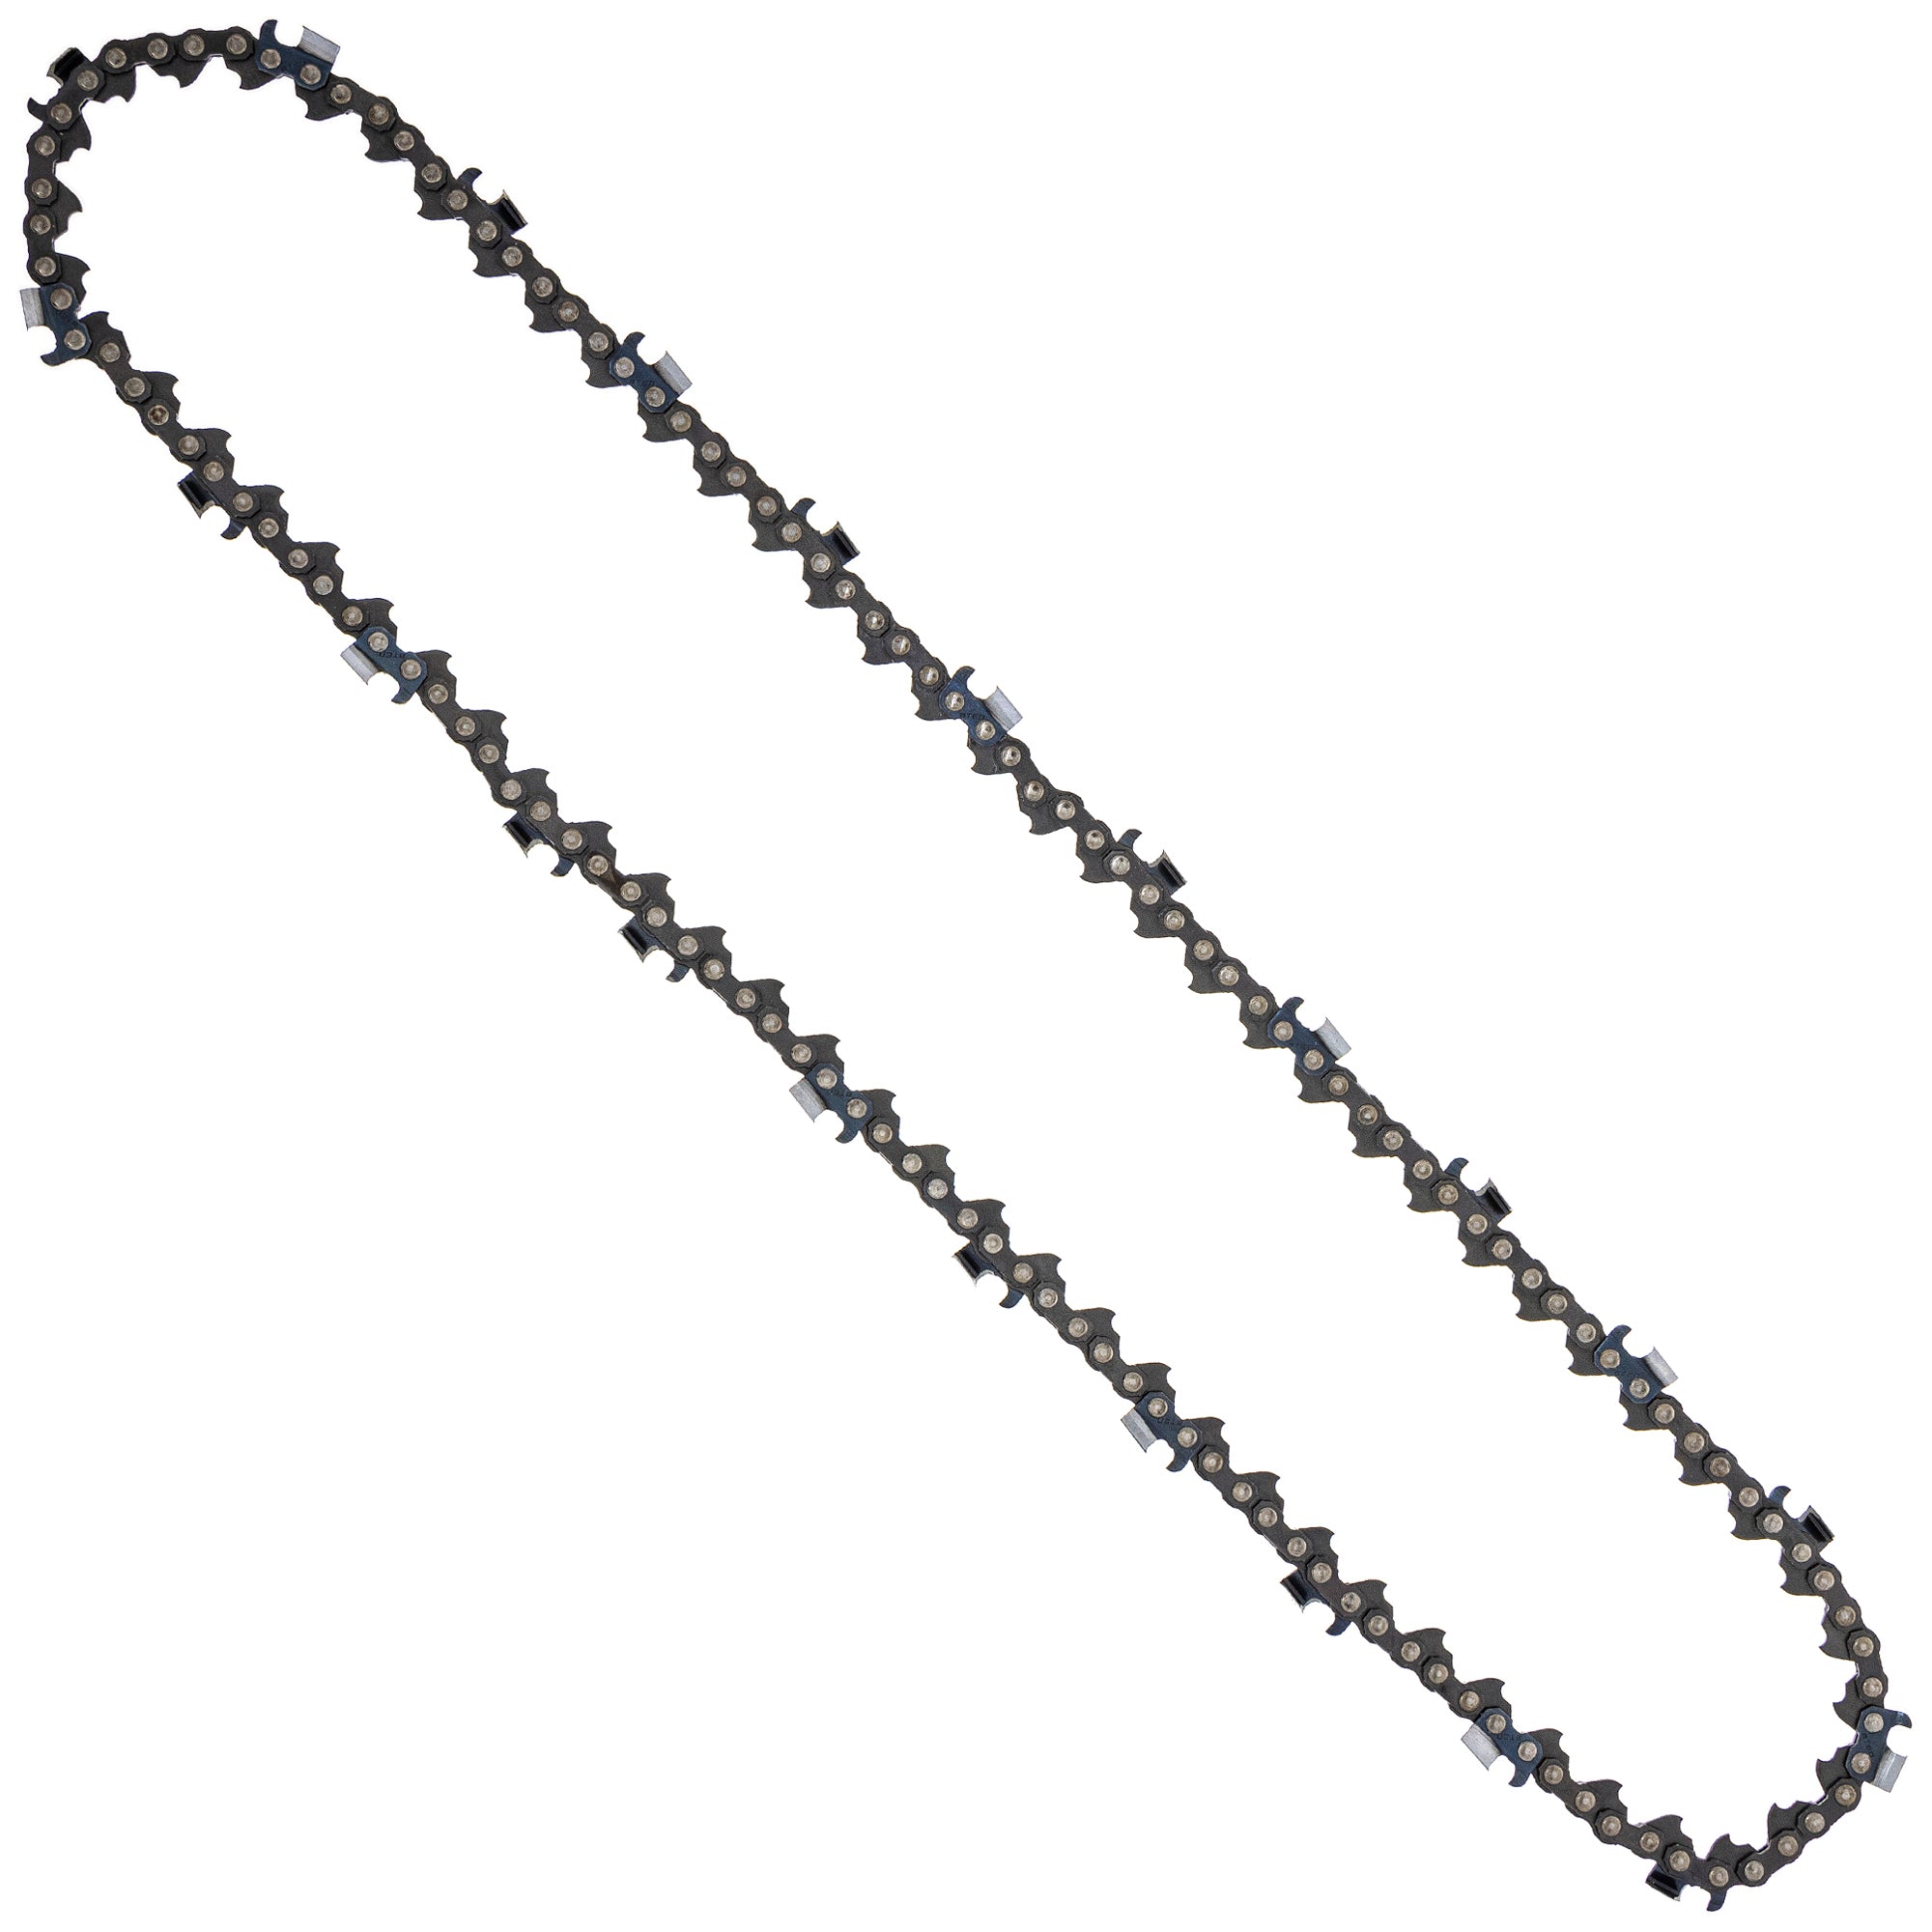 8TEN 810-CCC2392H Chain 3-Pack for zOTHER Oregon Husqvarna Poulan